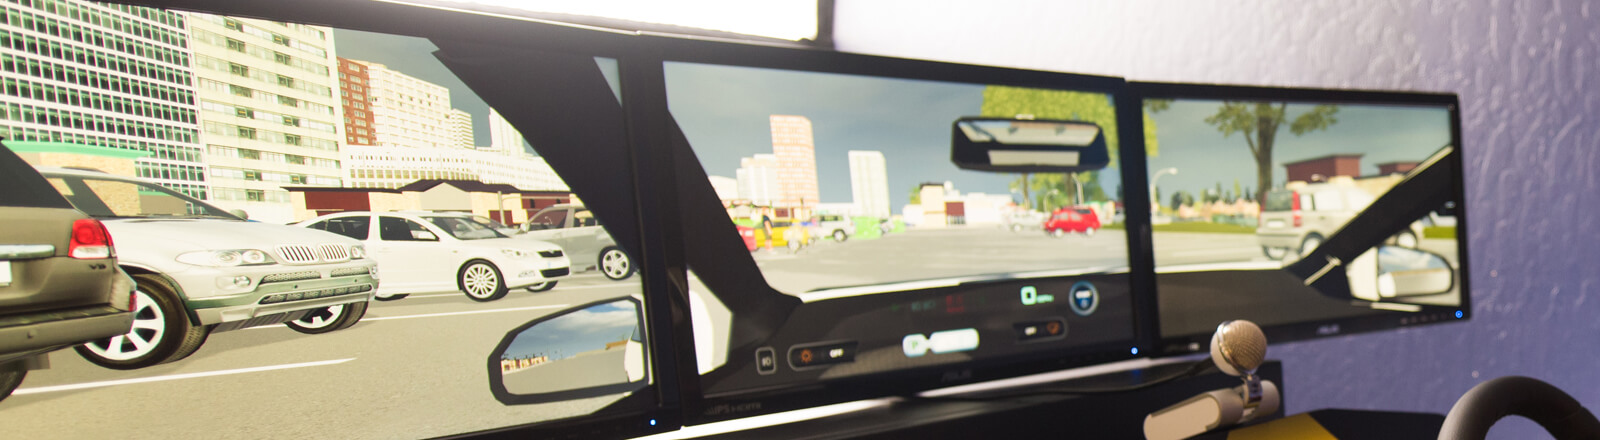 Virtual Driver switches gears, accelerates growth